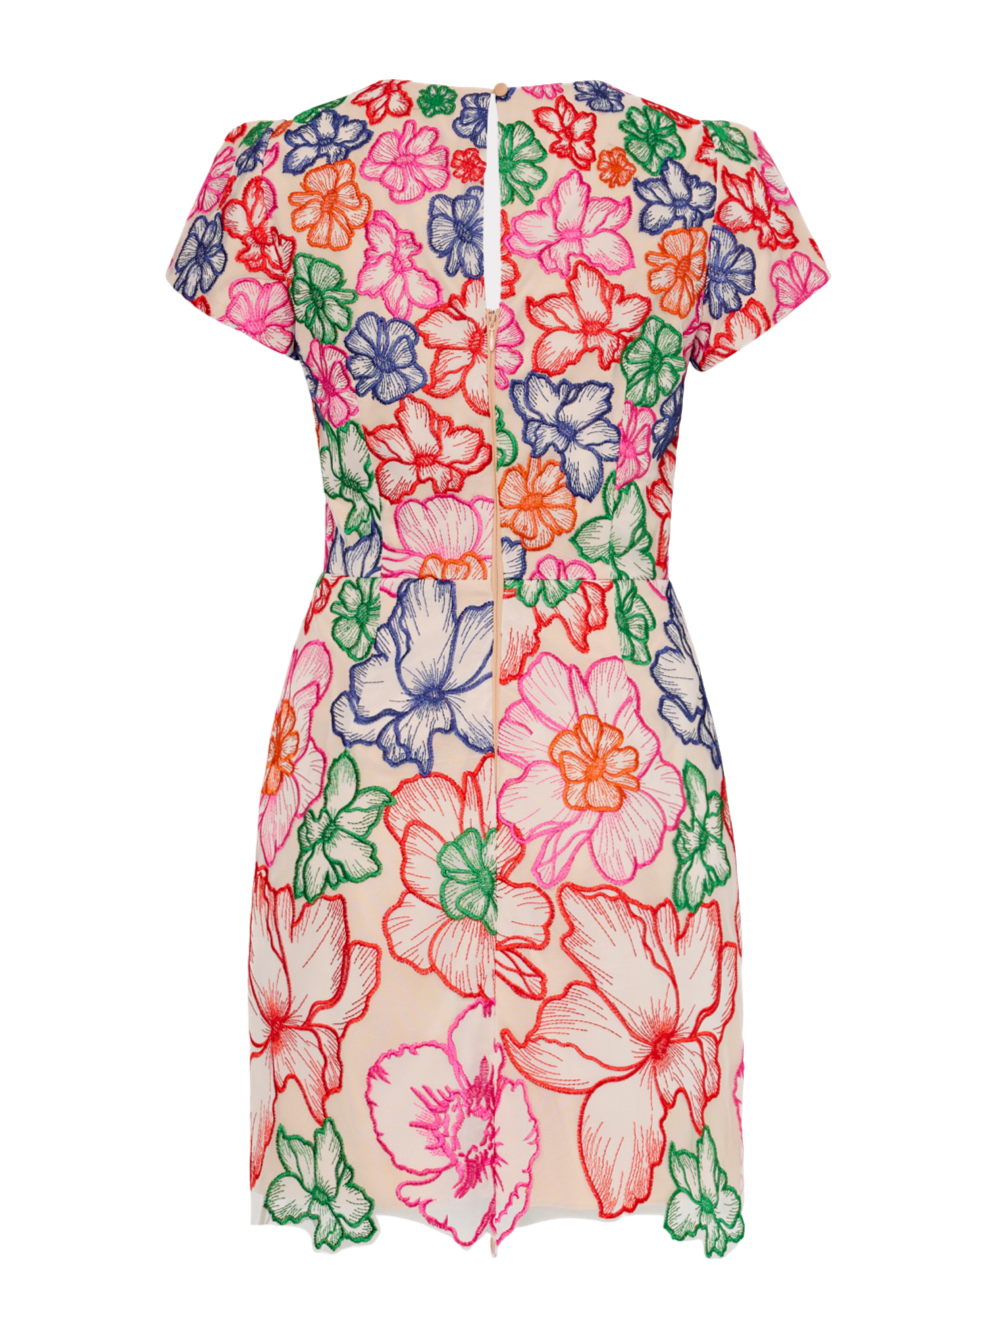 Milly Kyla Cascading Floral Embroidered Dress in Multi